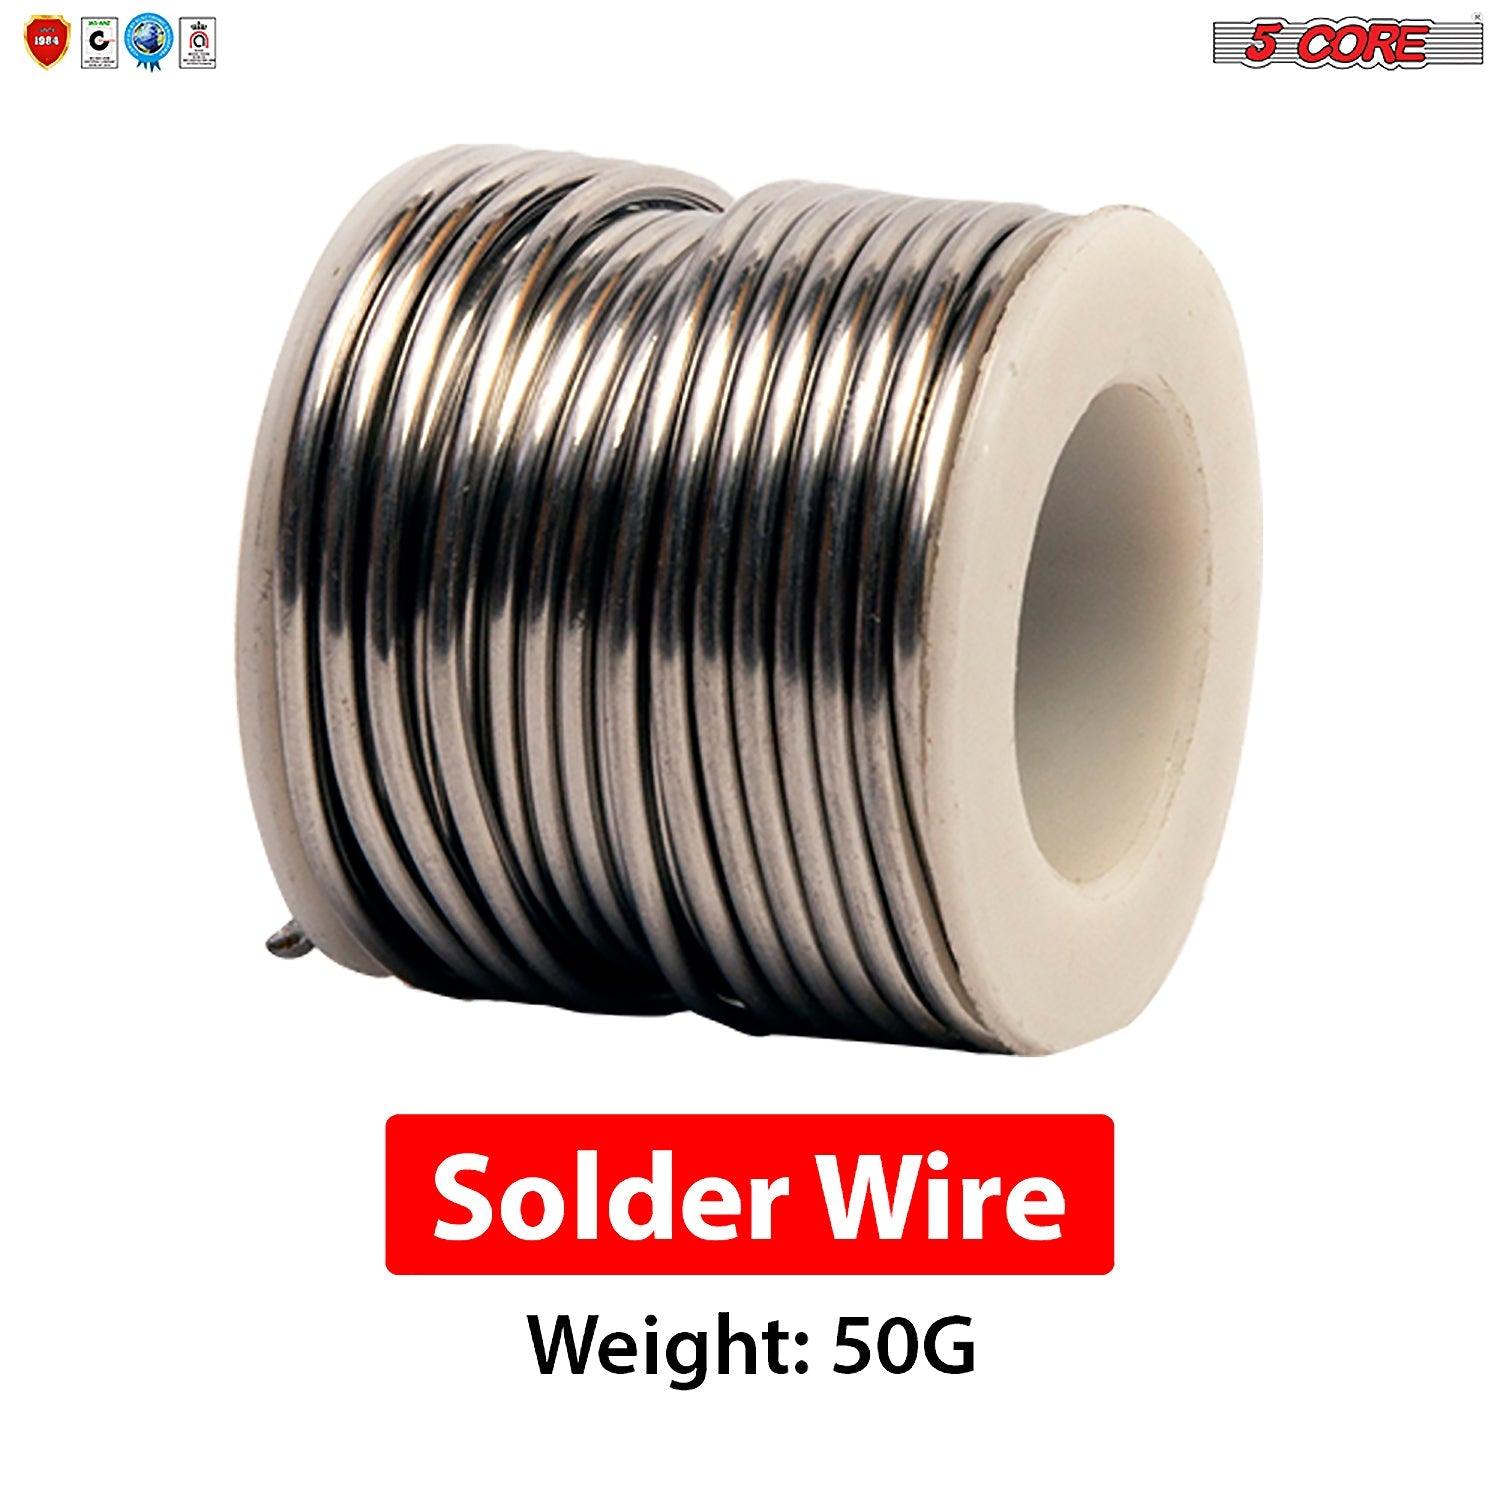 5 Core Solder Wire 5 Pack Rosin Core Flux Soldering Wire 63/37 63% Tin - VirtuousWares:Global